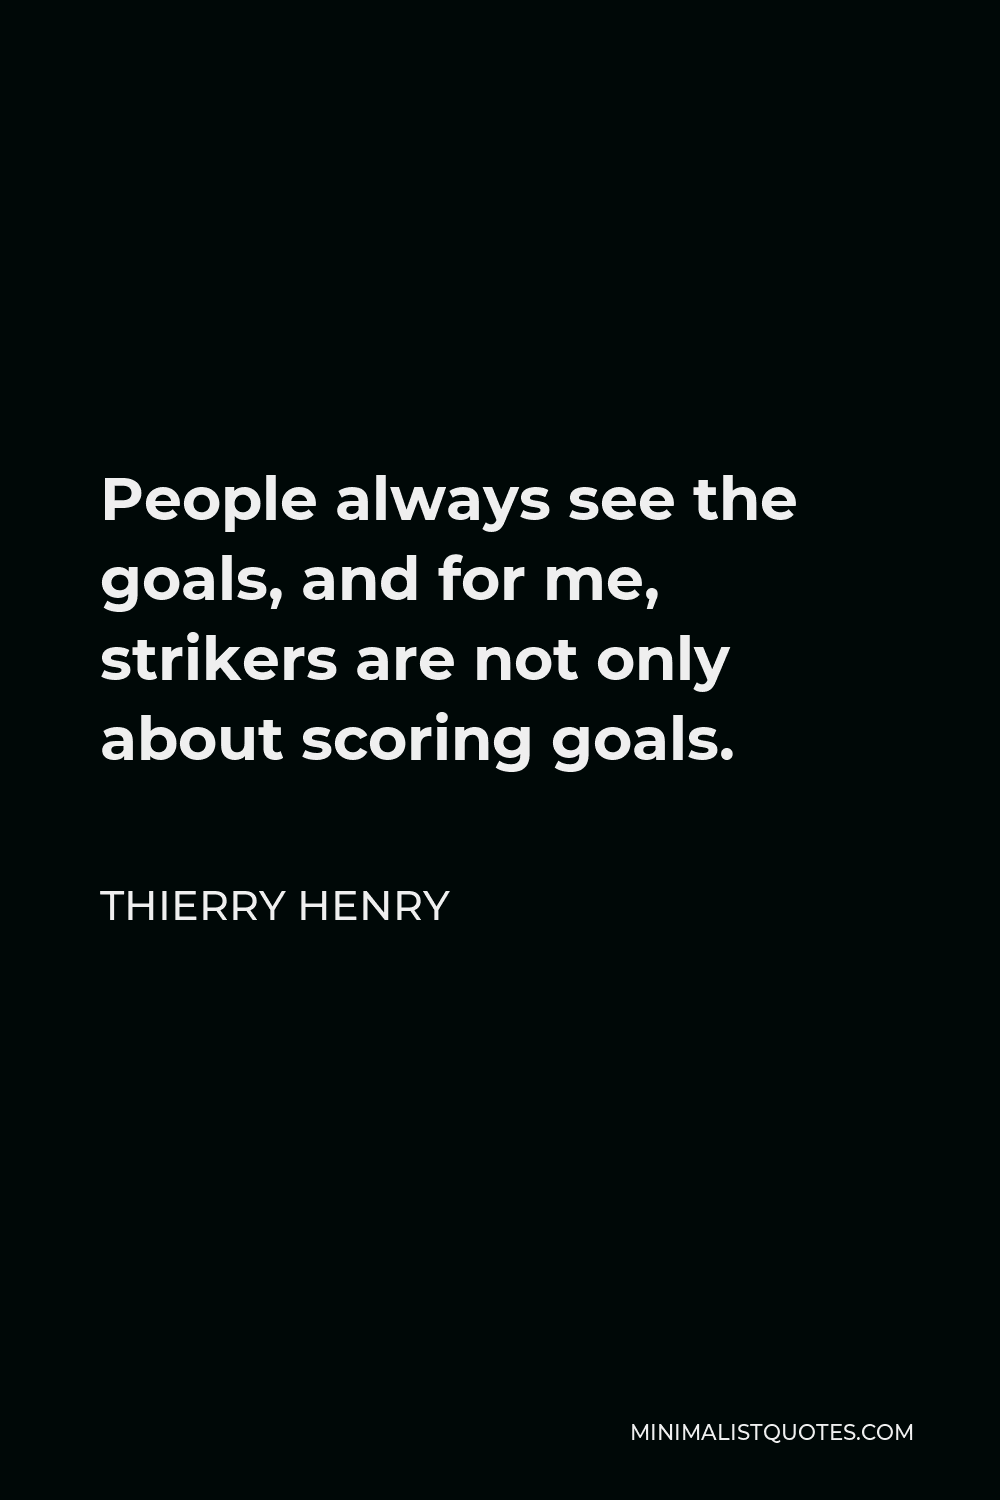 Thierry Henry Quote - People always see the goals, and for me, strikers are not only about scoring goals.